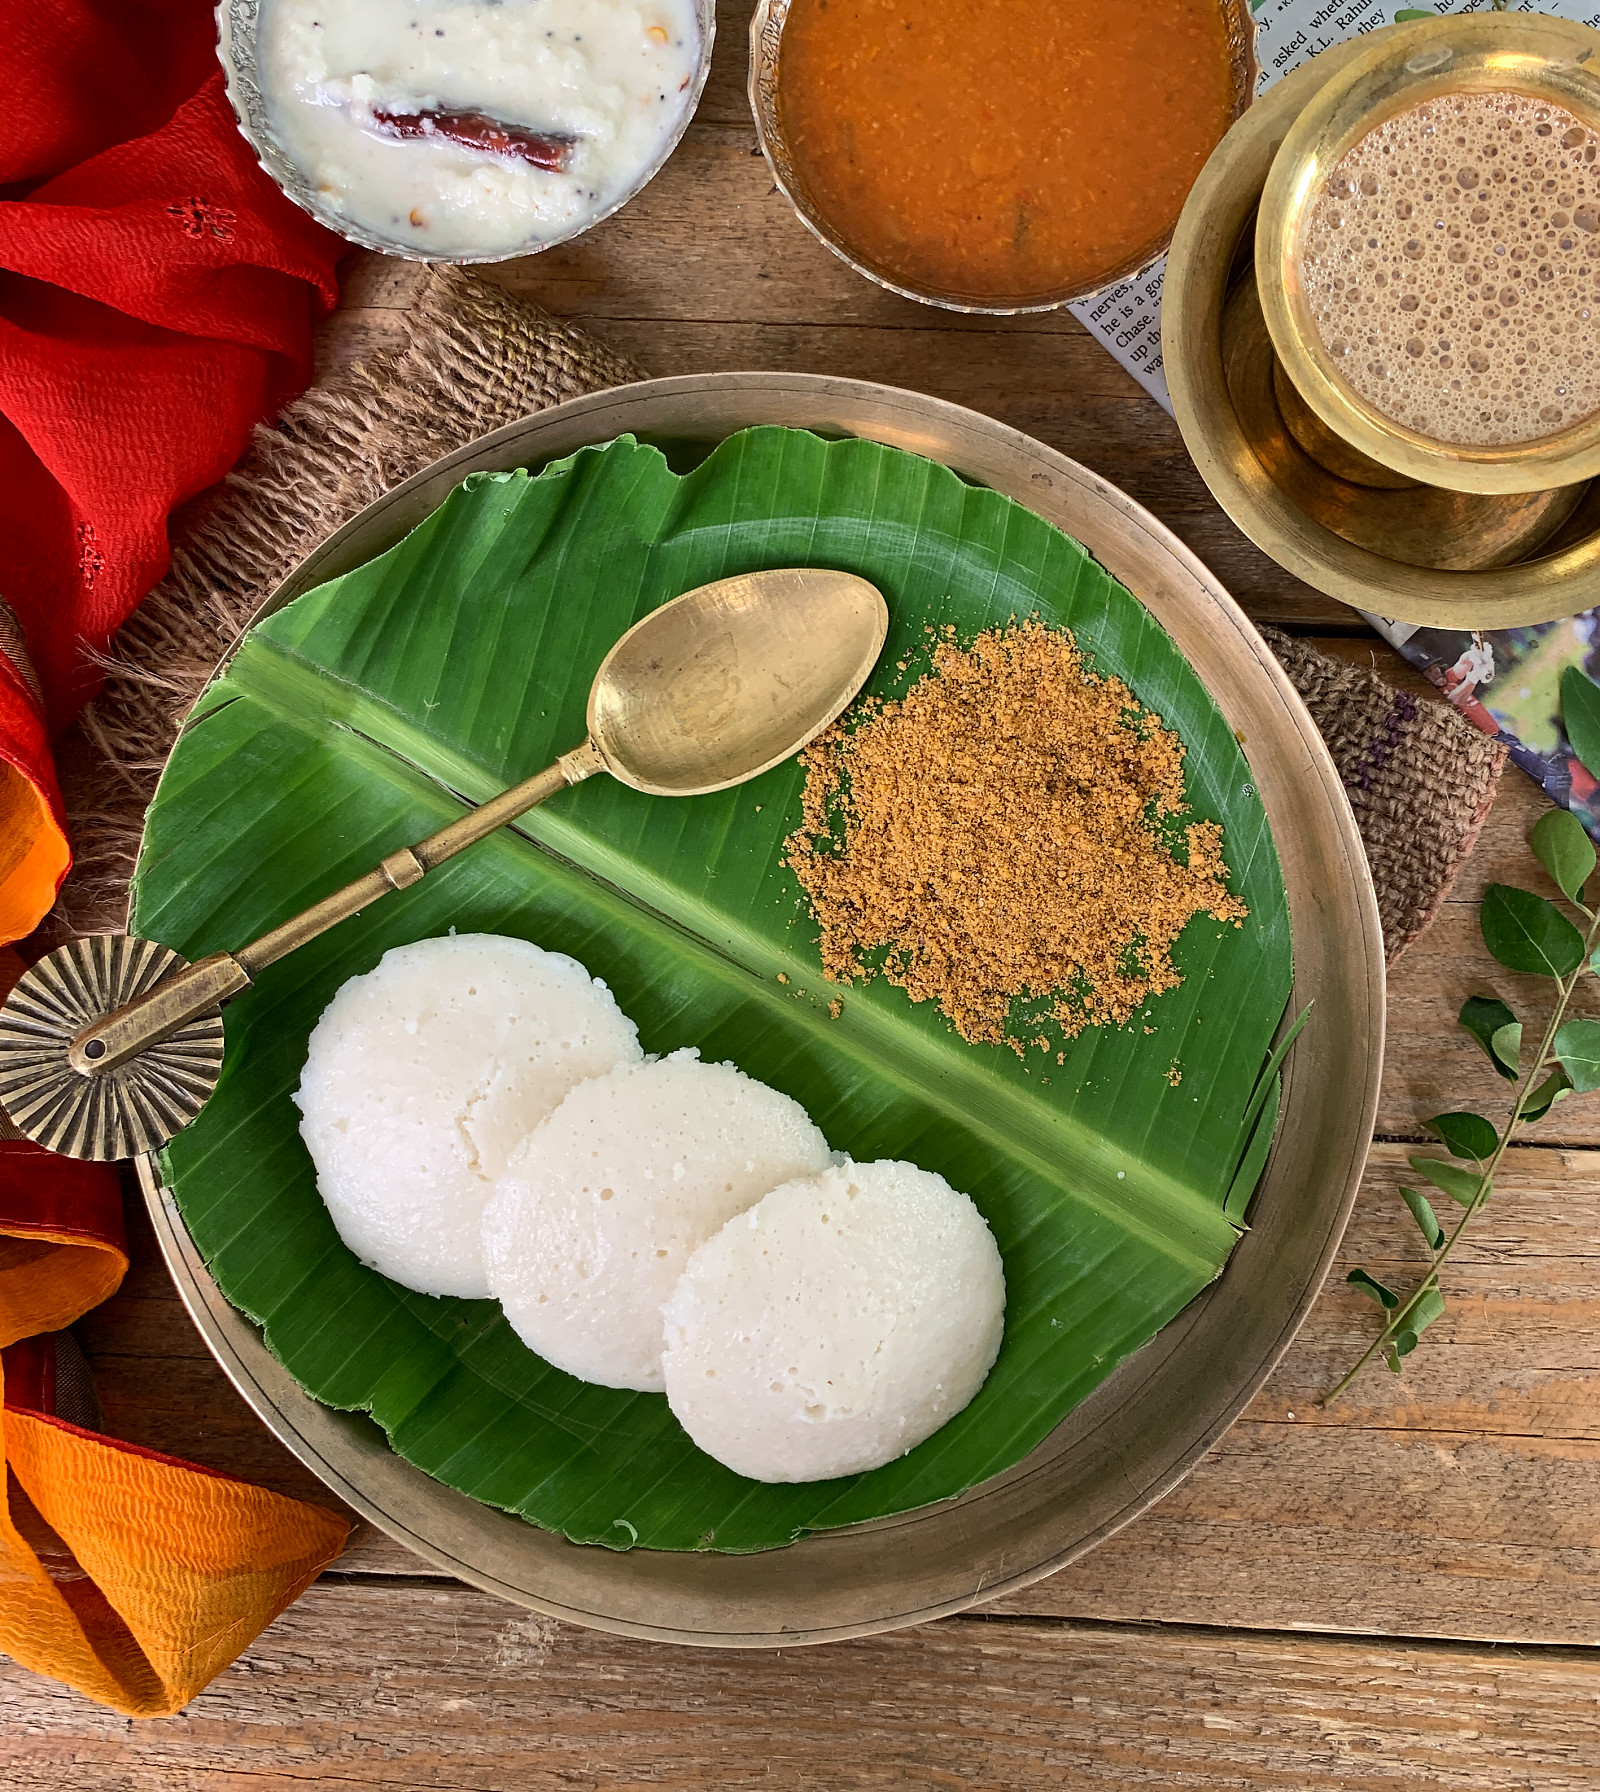 Homemade Soft Idli Recipe Steamed Rice And Lentil Cake By Archana S